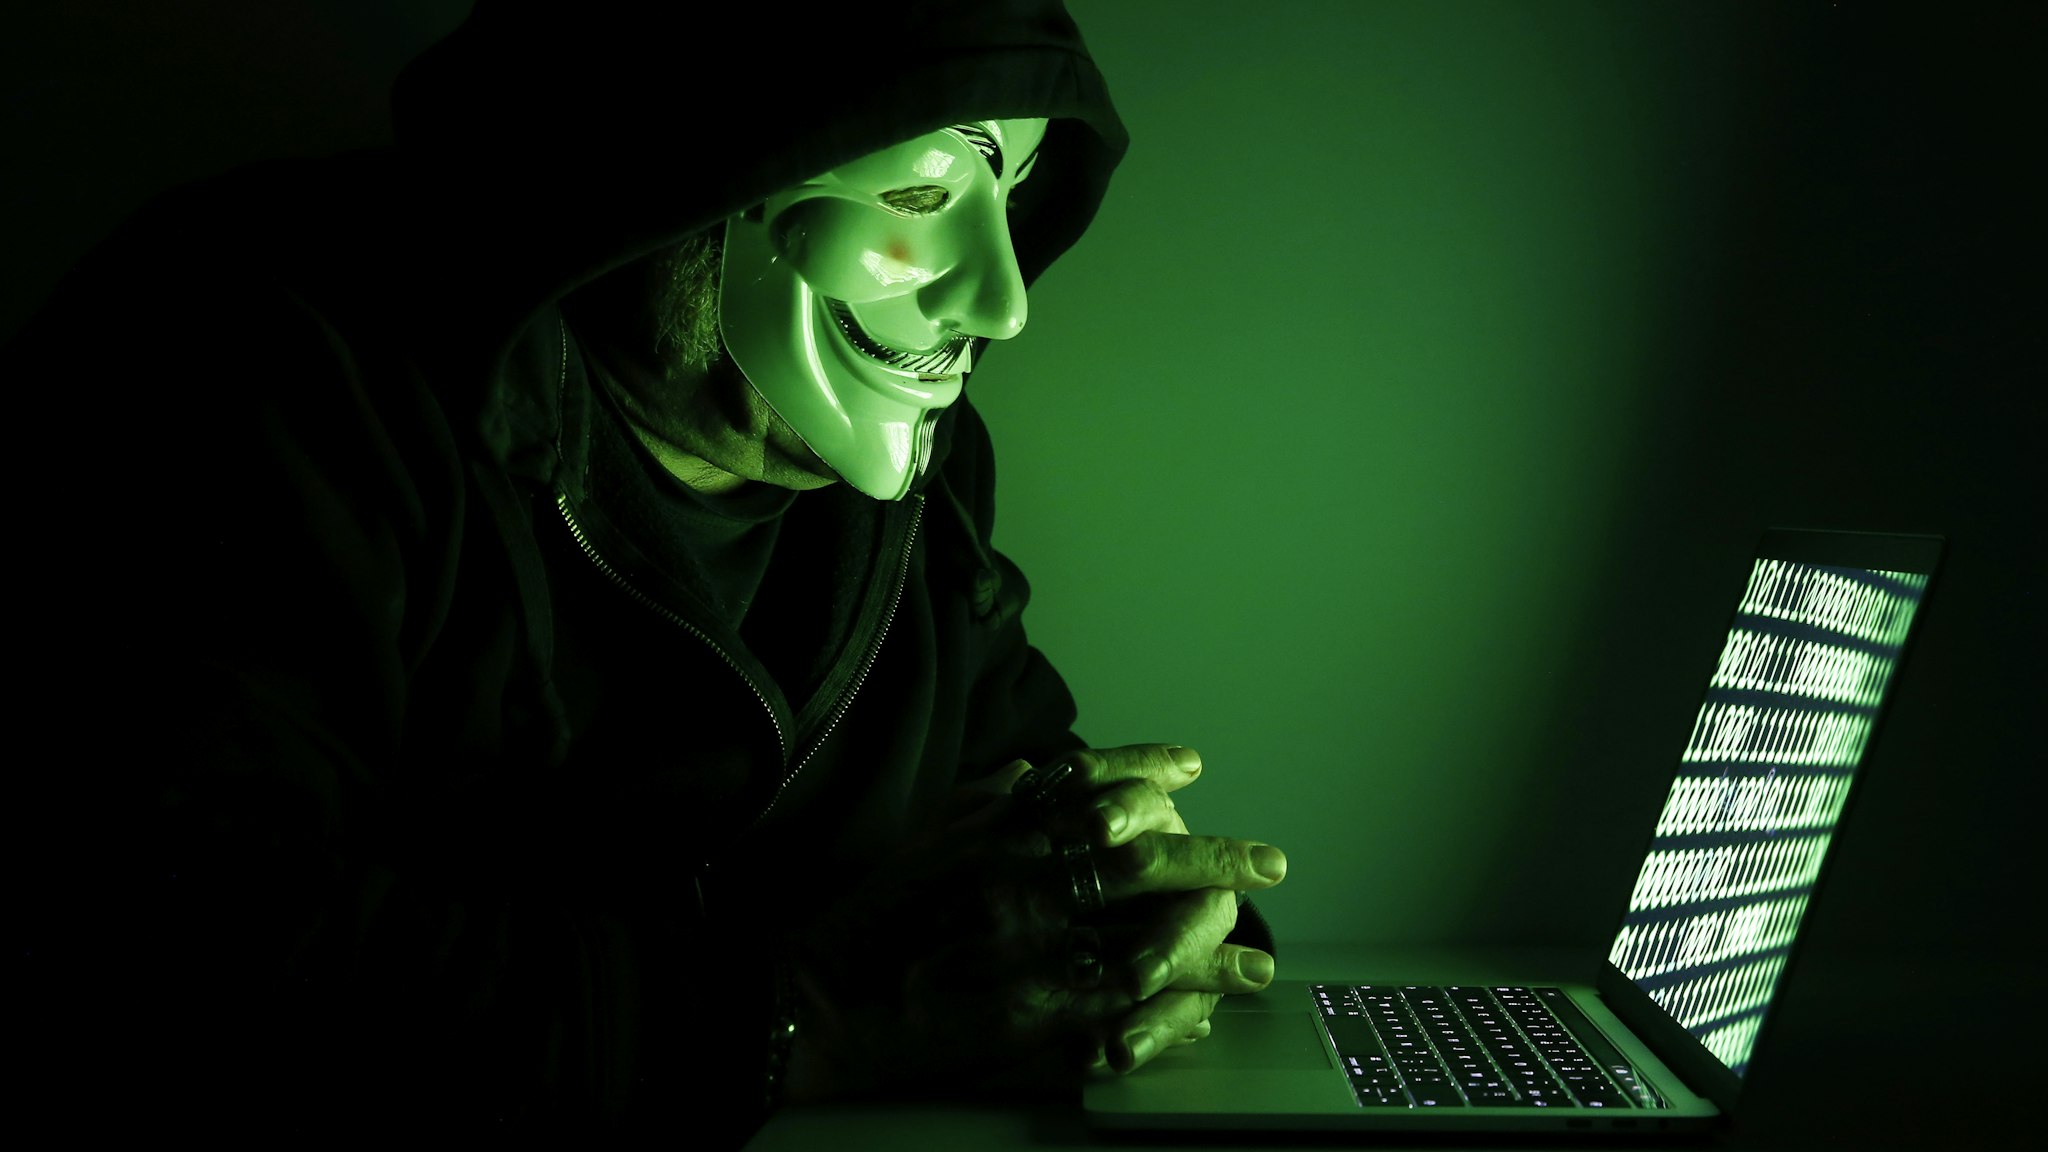 PARIS, FRANCE - DECEMBER 27: In this photo illustration, a hacker with an Anonymous mask on his face and a hood on his head uses a computer on December 27, 2019 in Paris, France. In IT security, a hacker is an IT specialist, who is looking for ways to bypass software and hardware protections. Hackers are generally intelligent programmers who seek to manipulate or modify a computer system or network.